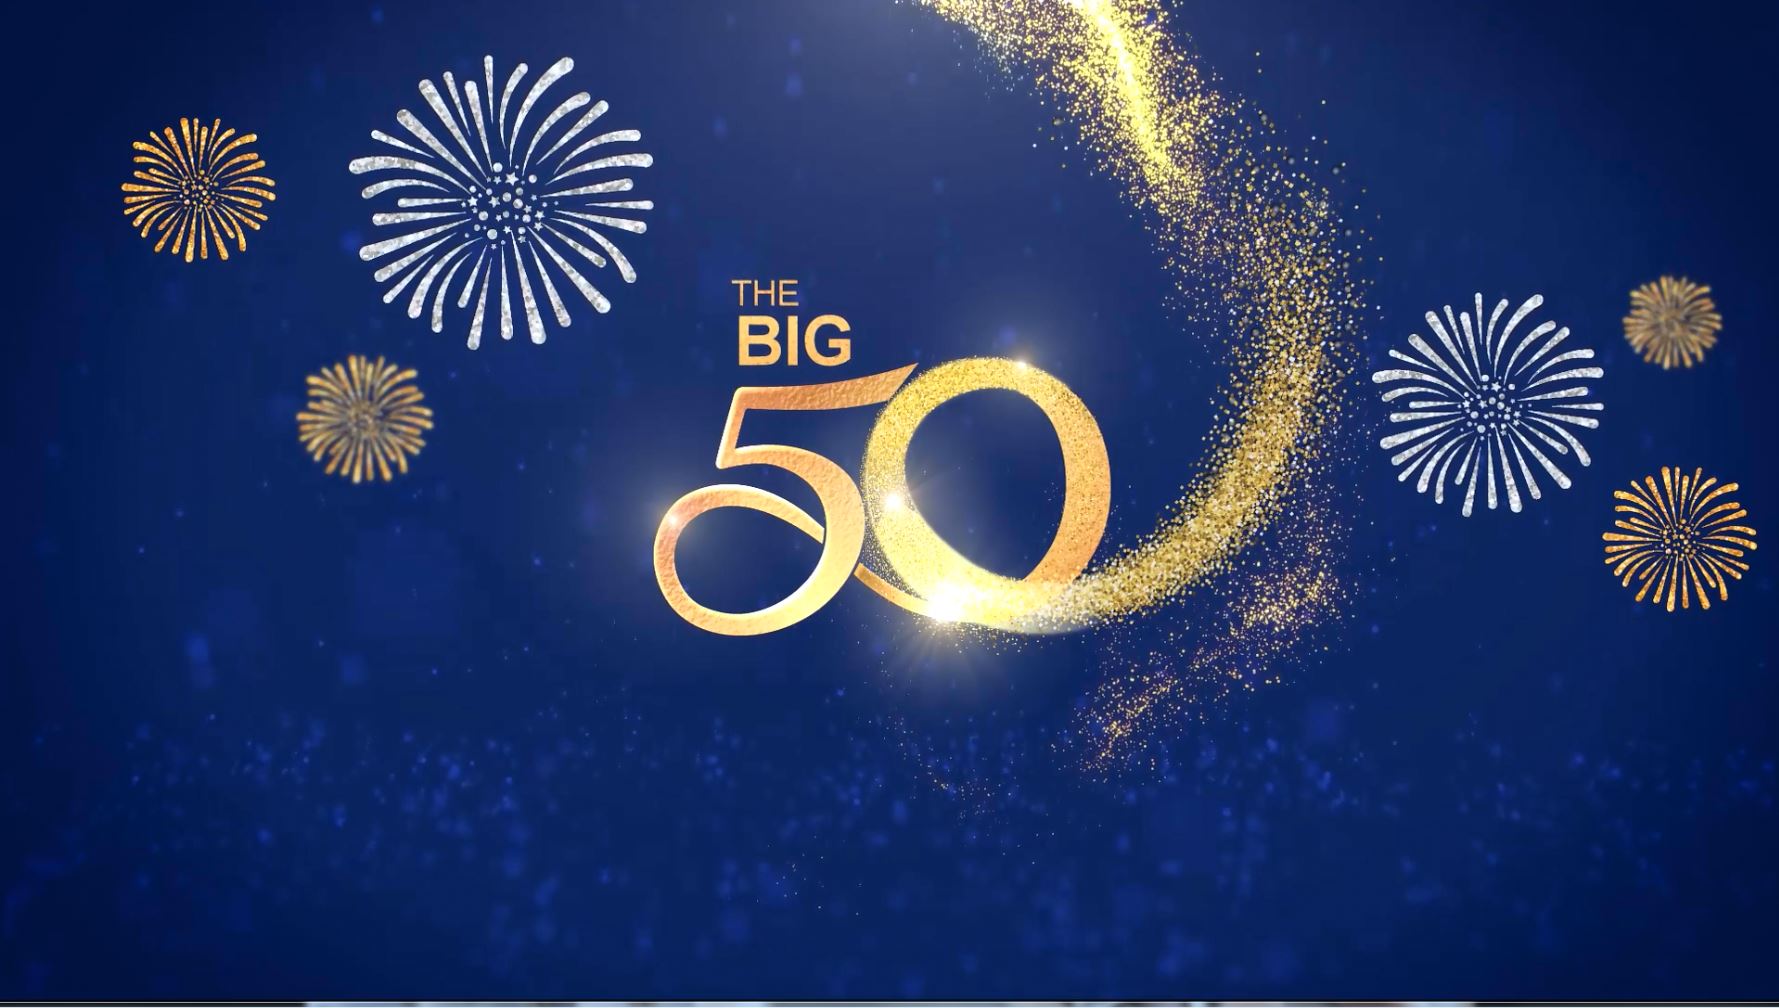 The Big 50 - Advertising | FOREFRONT International (Malaysia ...
